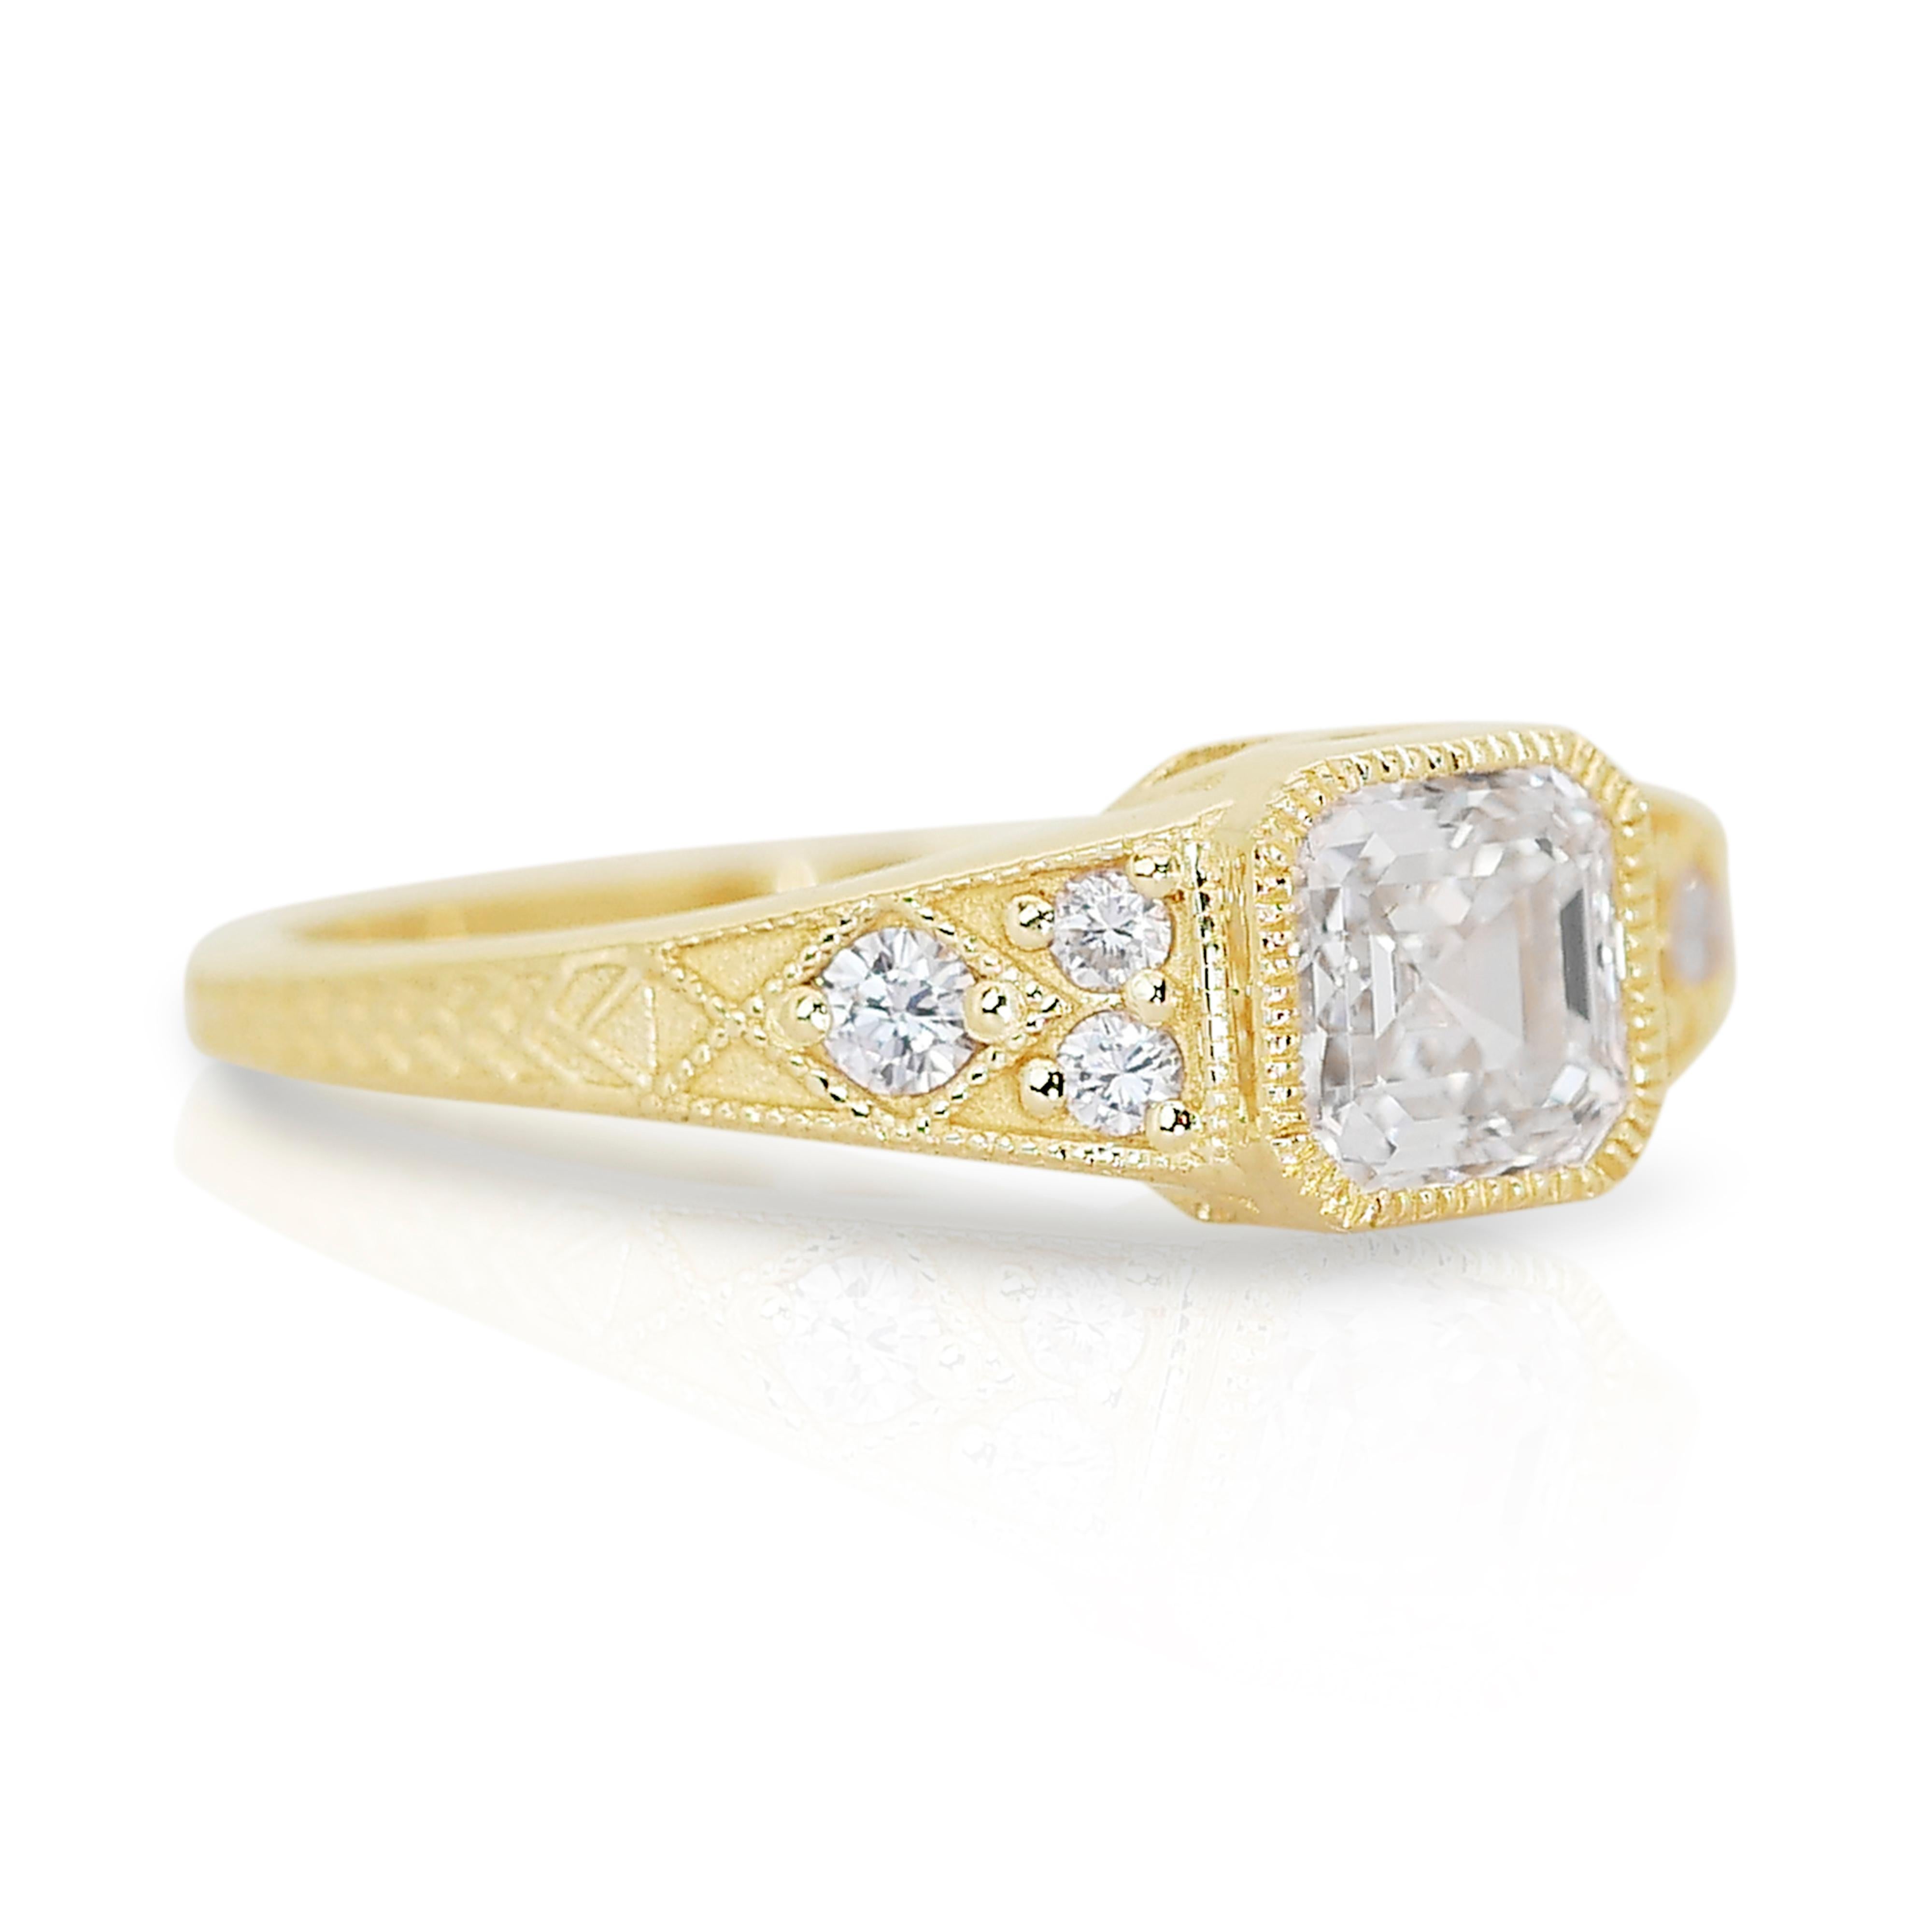 Beautiful 1.17ct Diamonds Pave Ring in 18k Yellow Gold - GIA Certified

Crafted from the finest 18k yellow gold, this exquisite pave ring features a majestic 1.02-carat square-cut diamond as its centerpiece. Surrounding the main stone are 6